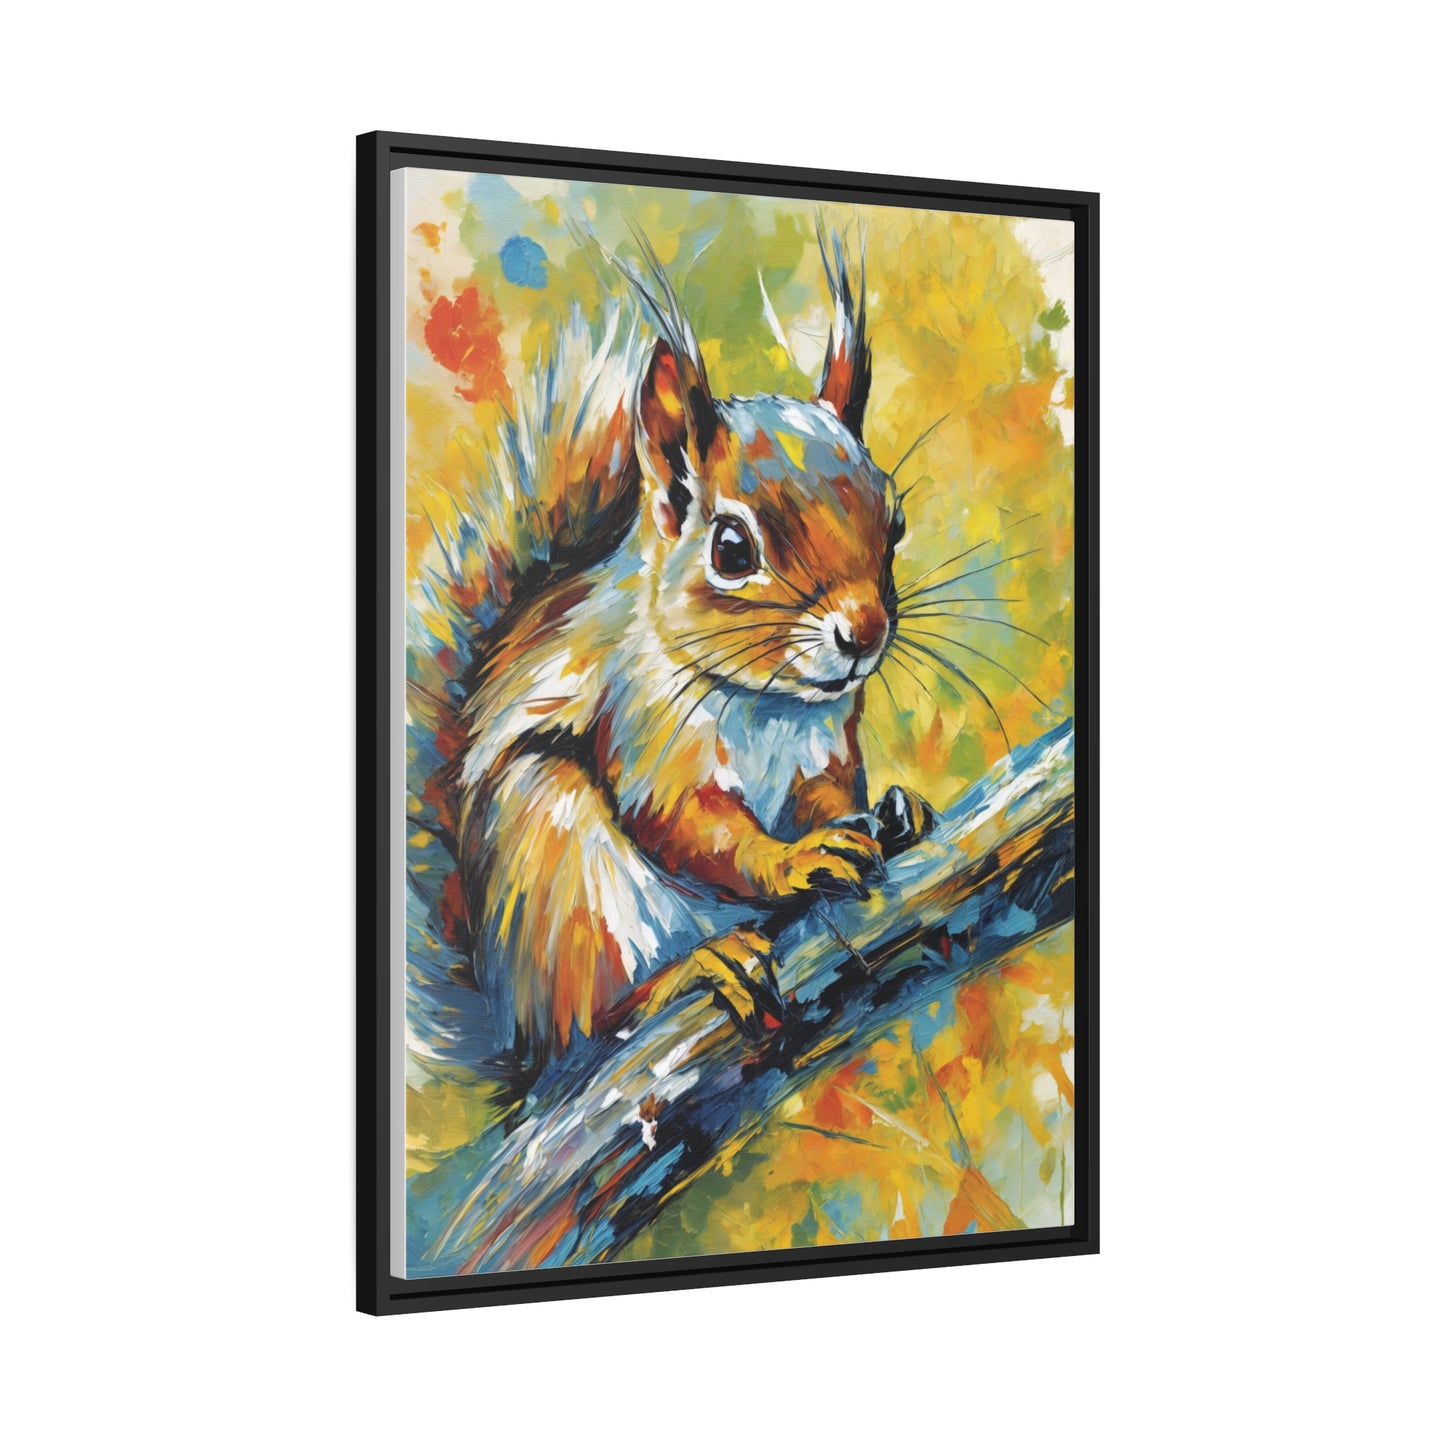 Radiant Squirrel in Motion Canvas Print, Wall Art Canvas, Home Decor, Colorful Squirrel Art, Woodland Creature Art